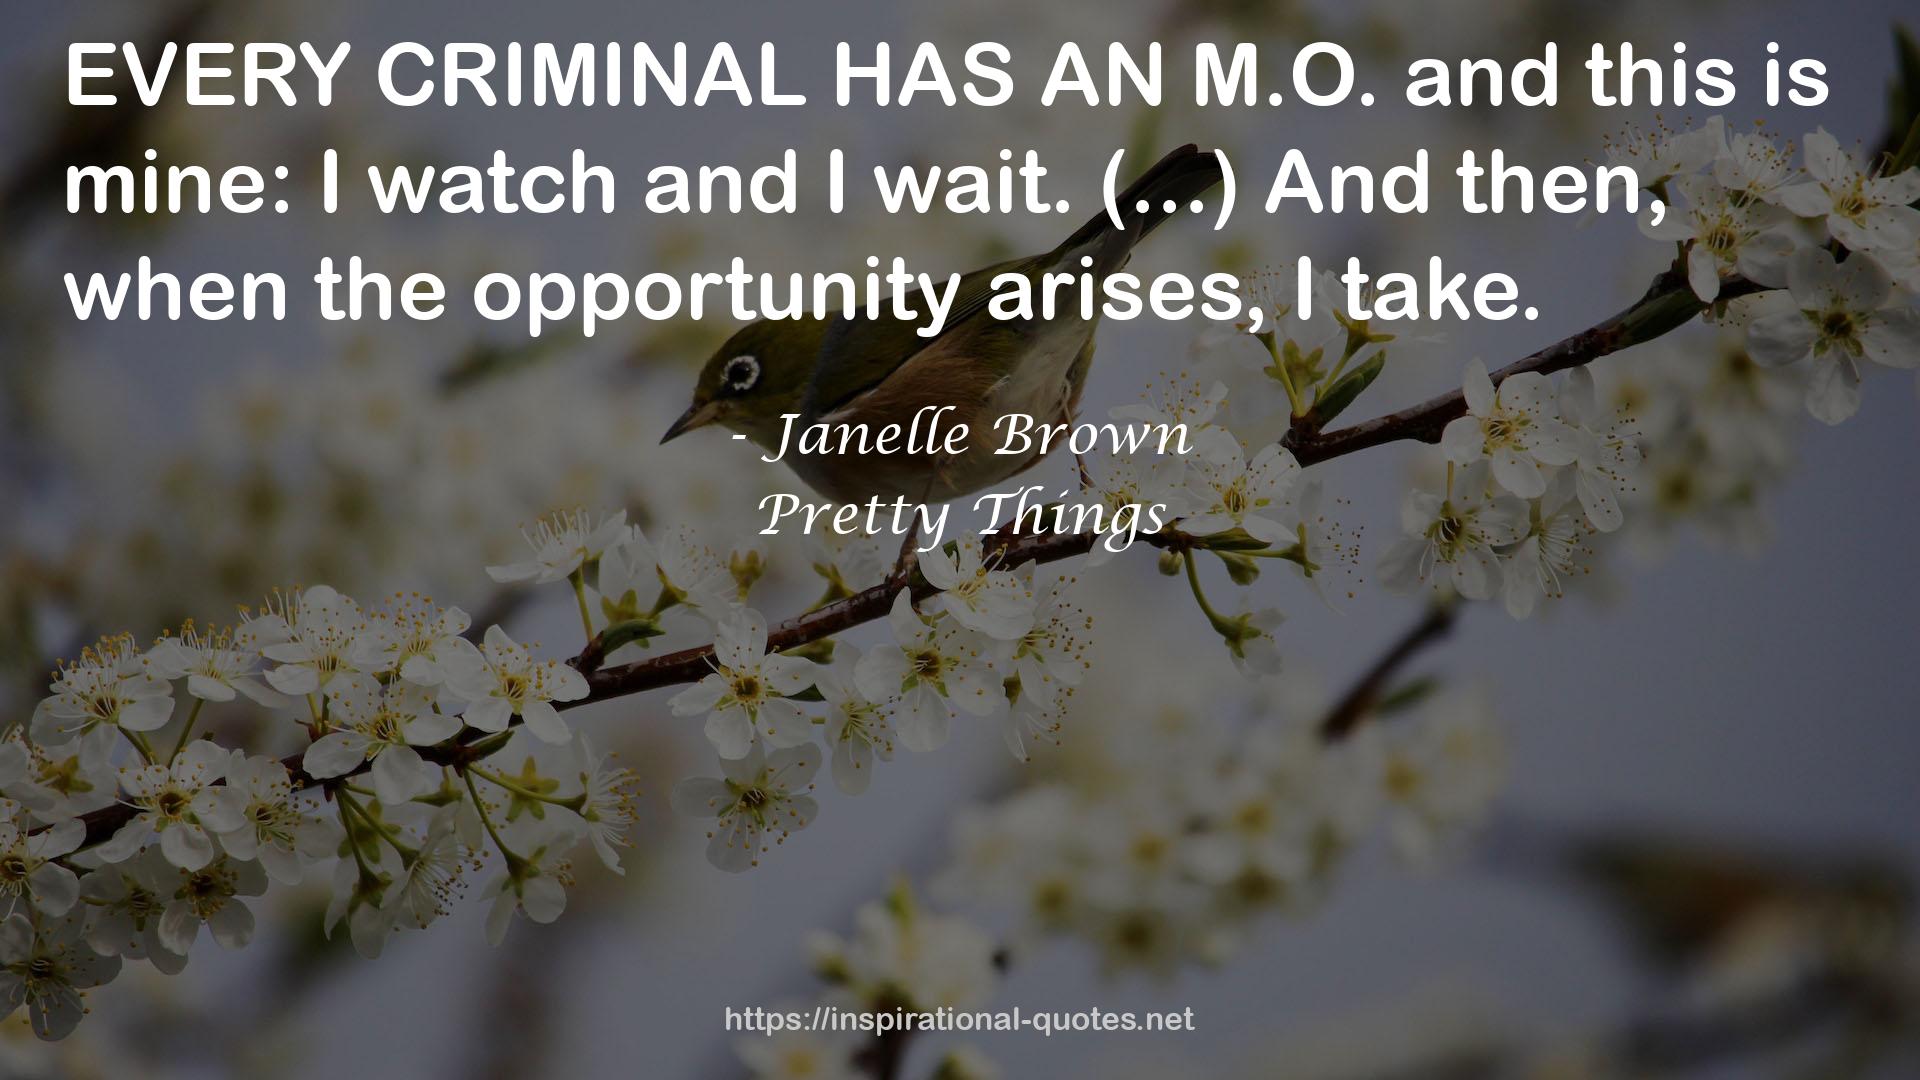 Janelle Brown QUOTES